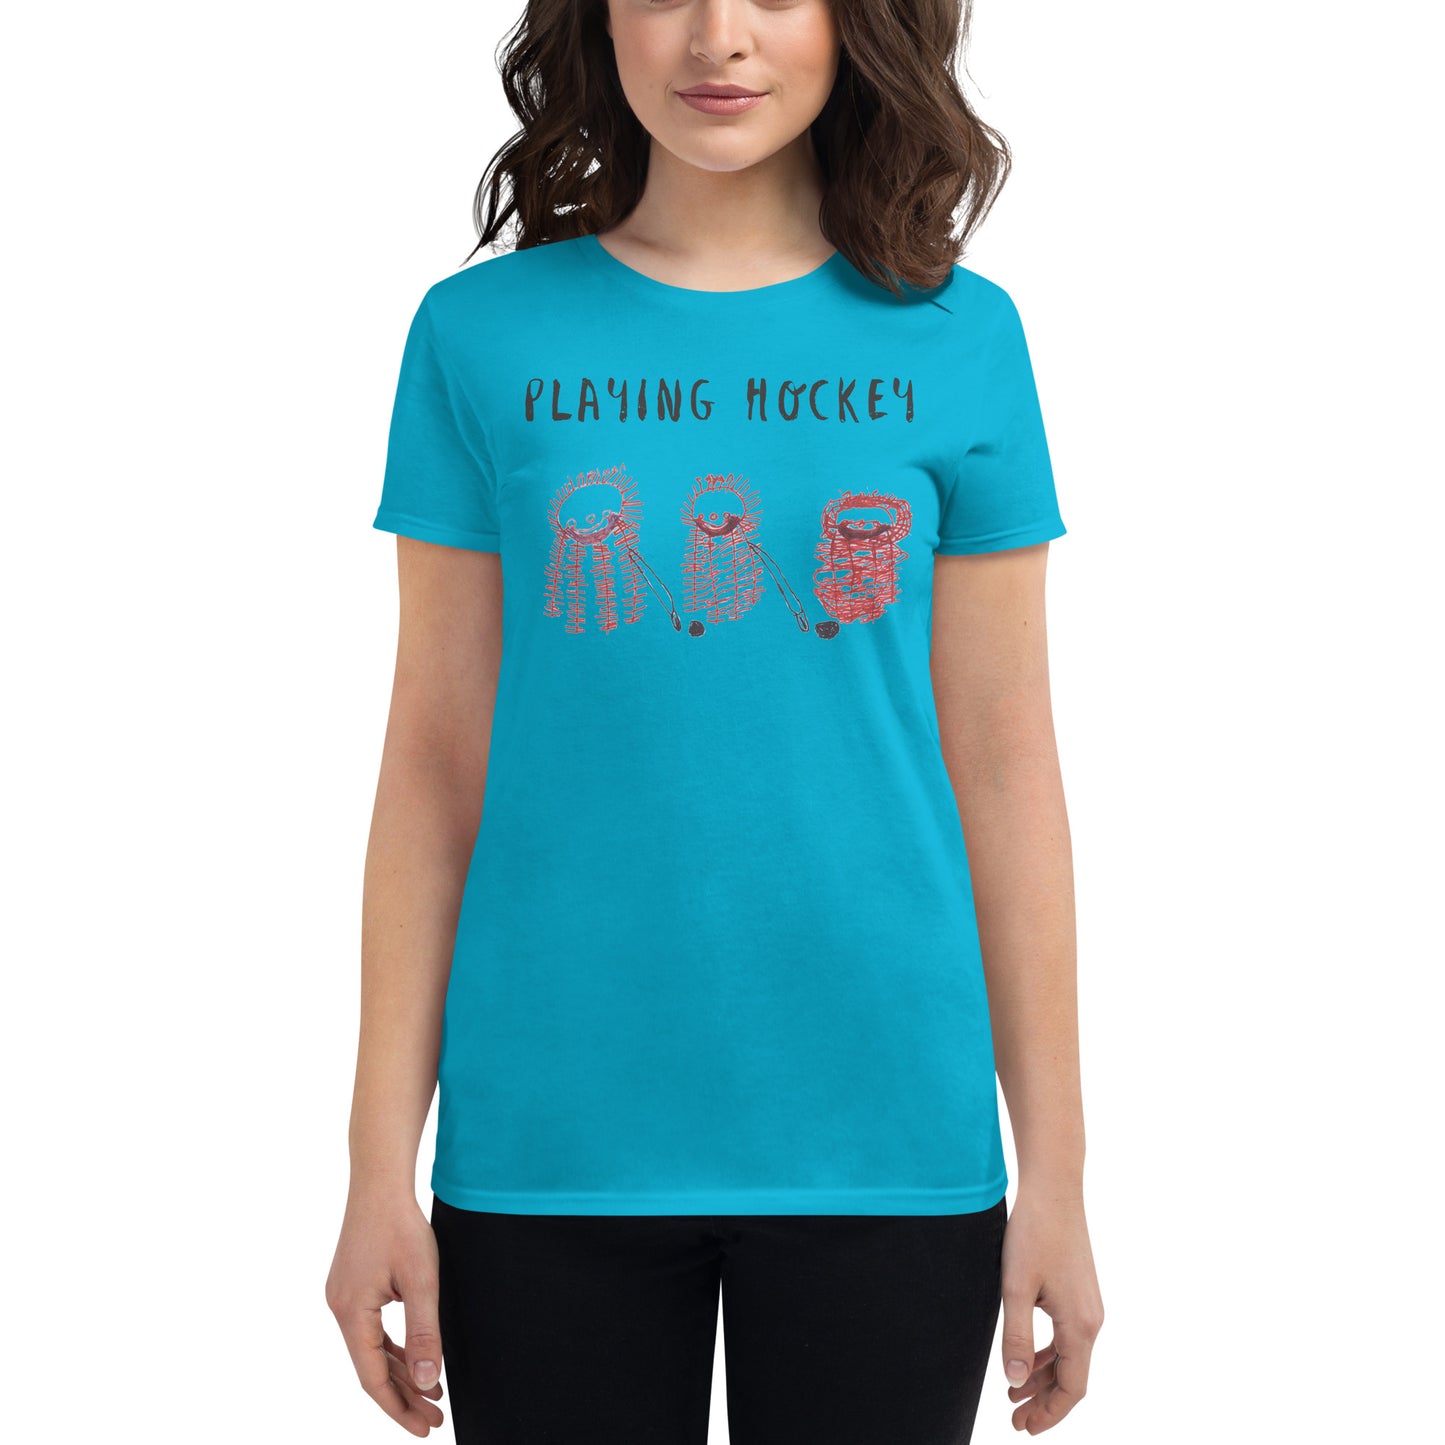 Women's tee - "Playing Hockey with the Condors"